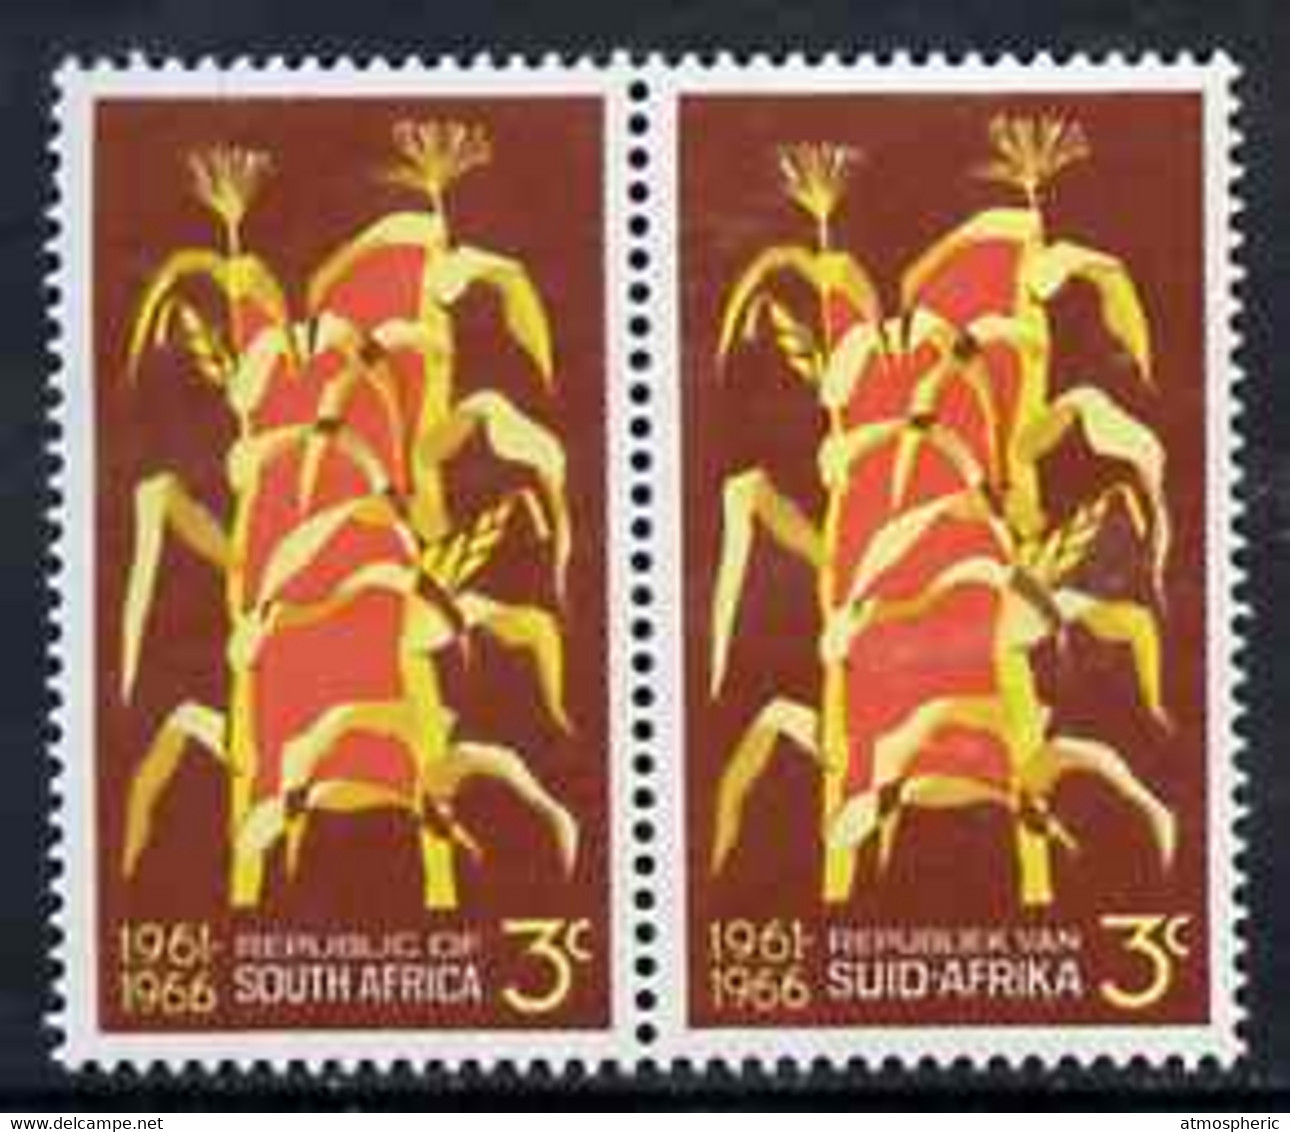 South Africa 1966 Maize Plants 3c Se-tenant Pair (from 5th Anniversary Set) U/M, SG 264 - Nuevos